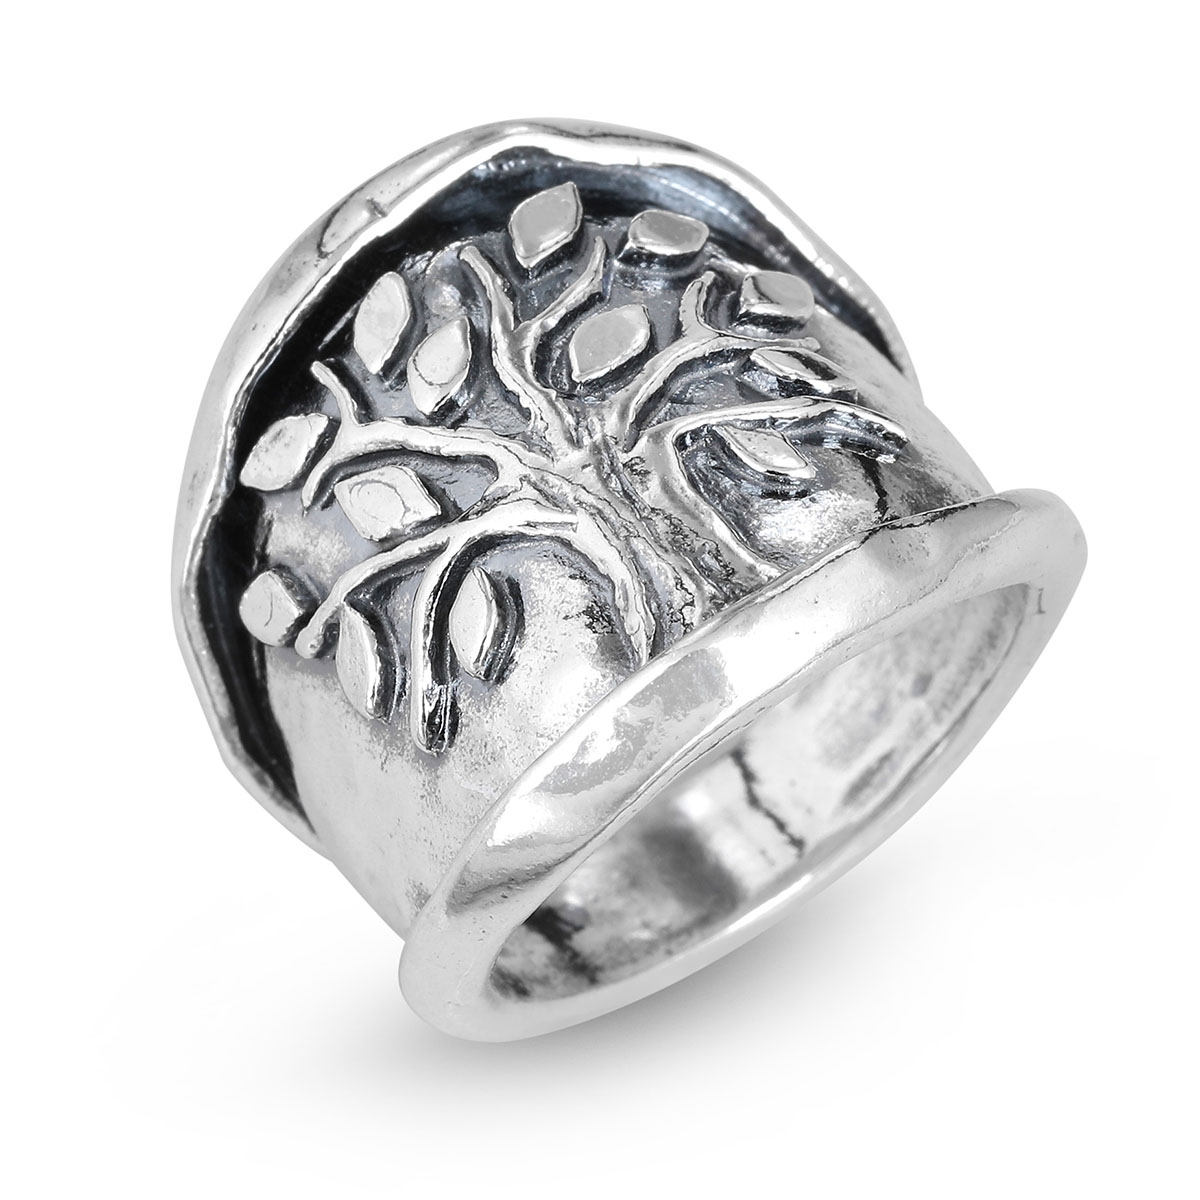 Heavy Sterling Silver Ring With Tree of Life Design - 1